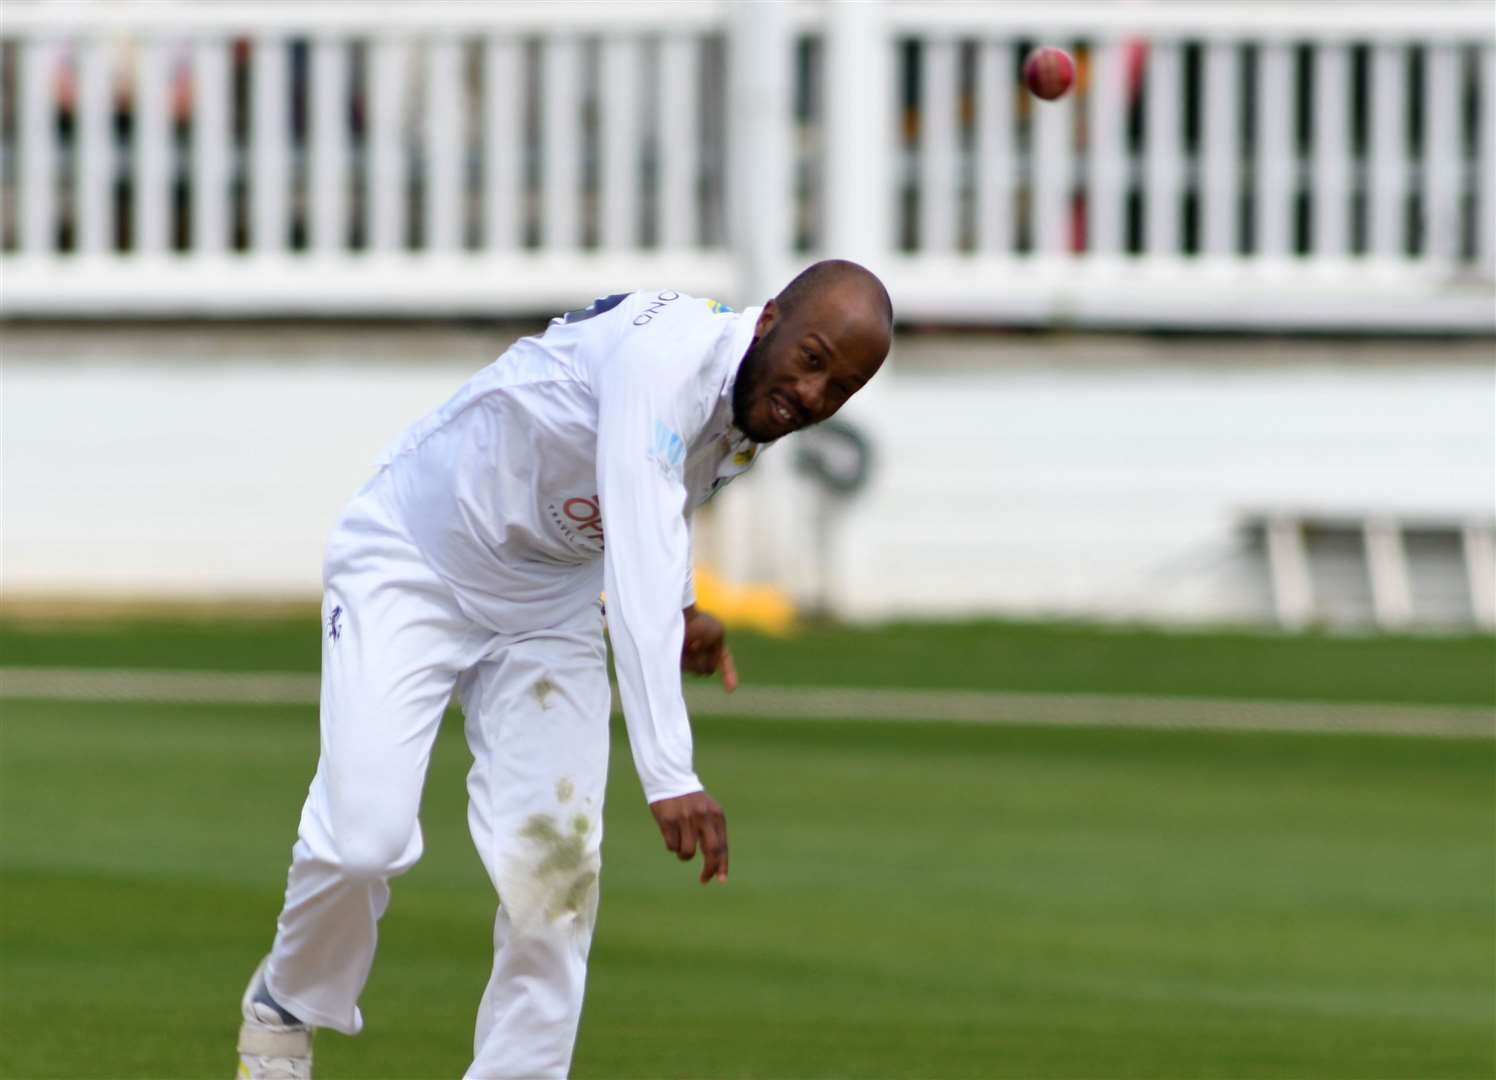 Daniel Bell-Drummond - took two wickets for Kent on day three of their County Championship clash against Northamptonshire. Picture: Barry Goodwin